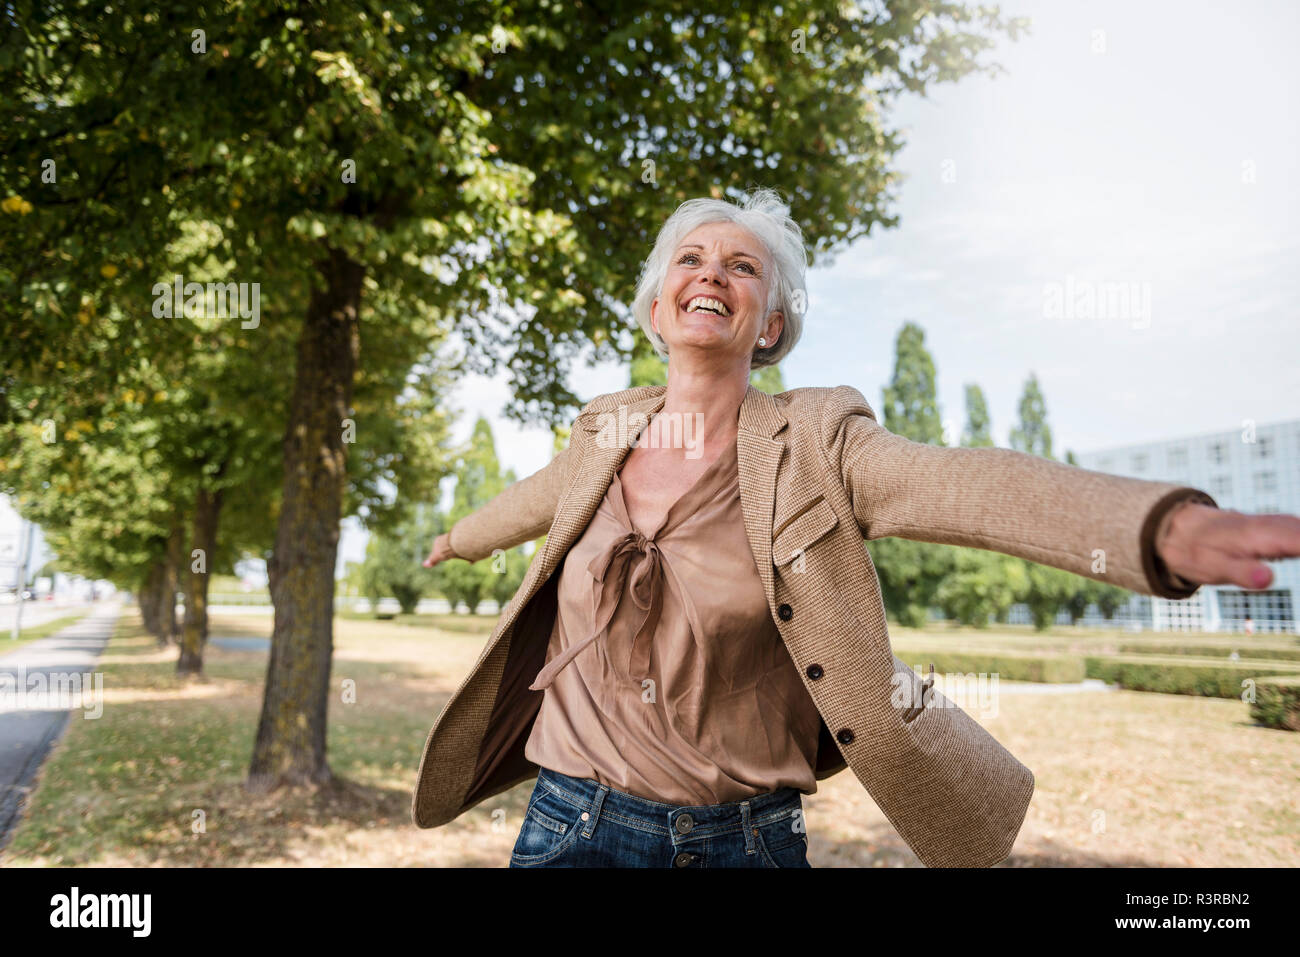 Happy senior woman with outstretched arms in a park Stock Photo